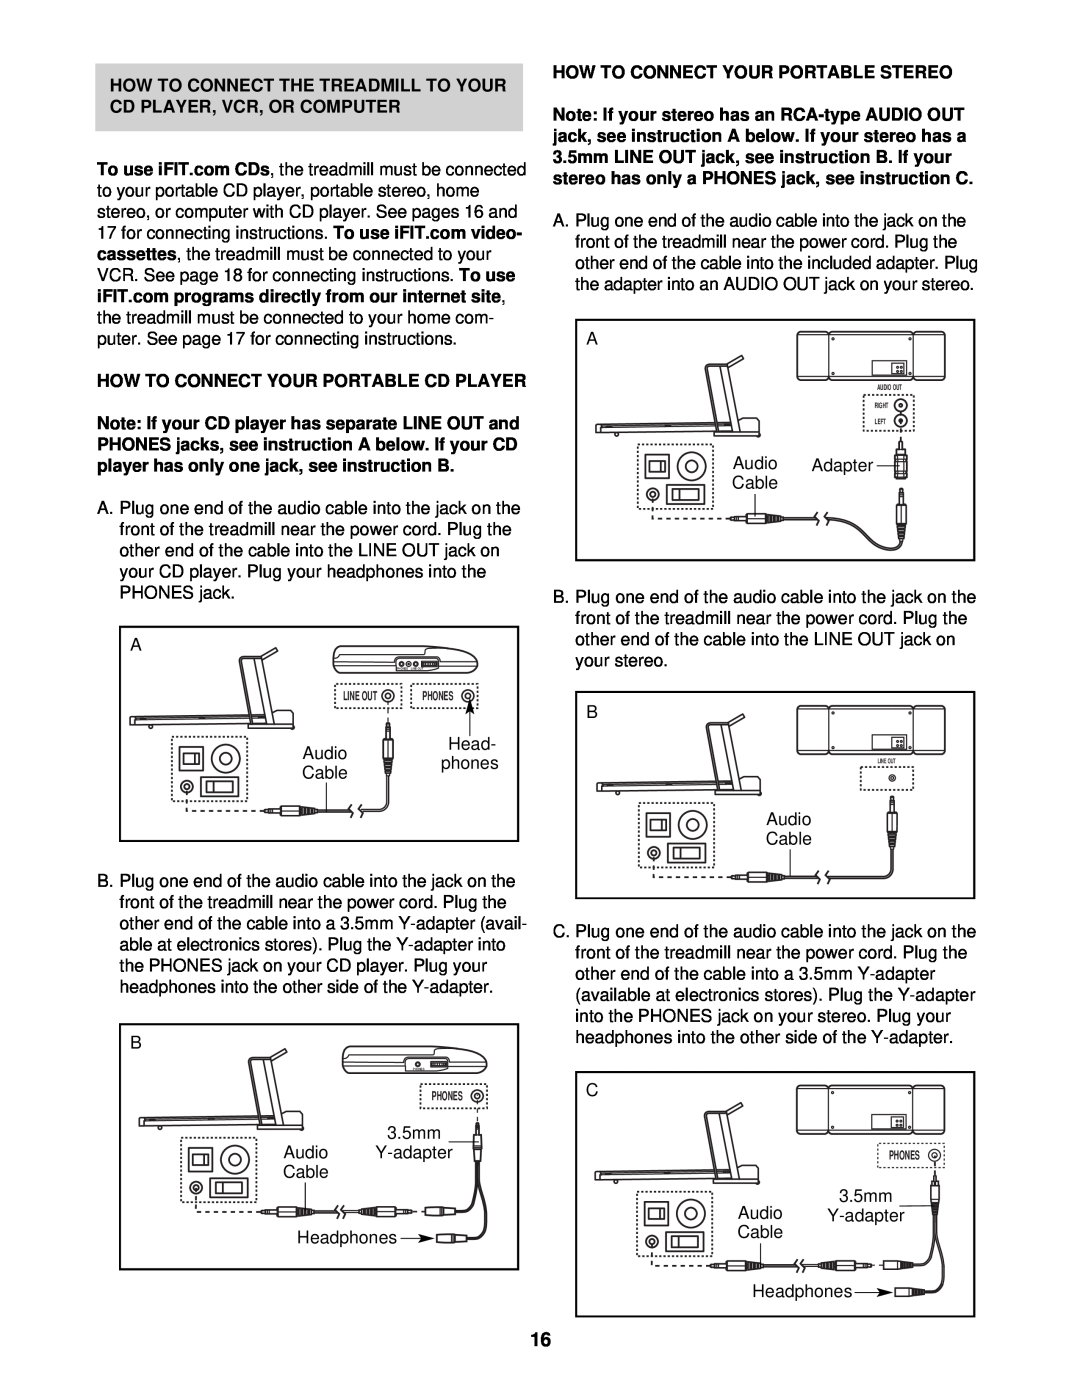 ProForm PFTL49721 How To Connect The Treadmill To Your Cd Player, Vcr, Or Computer, How To Connect Your Portable Cd Player 